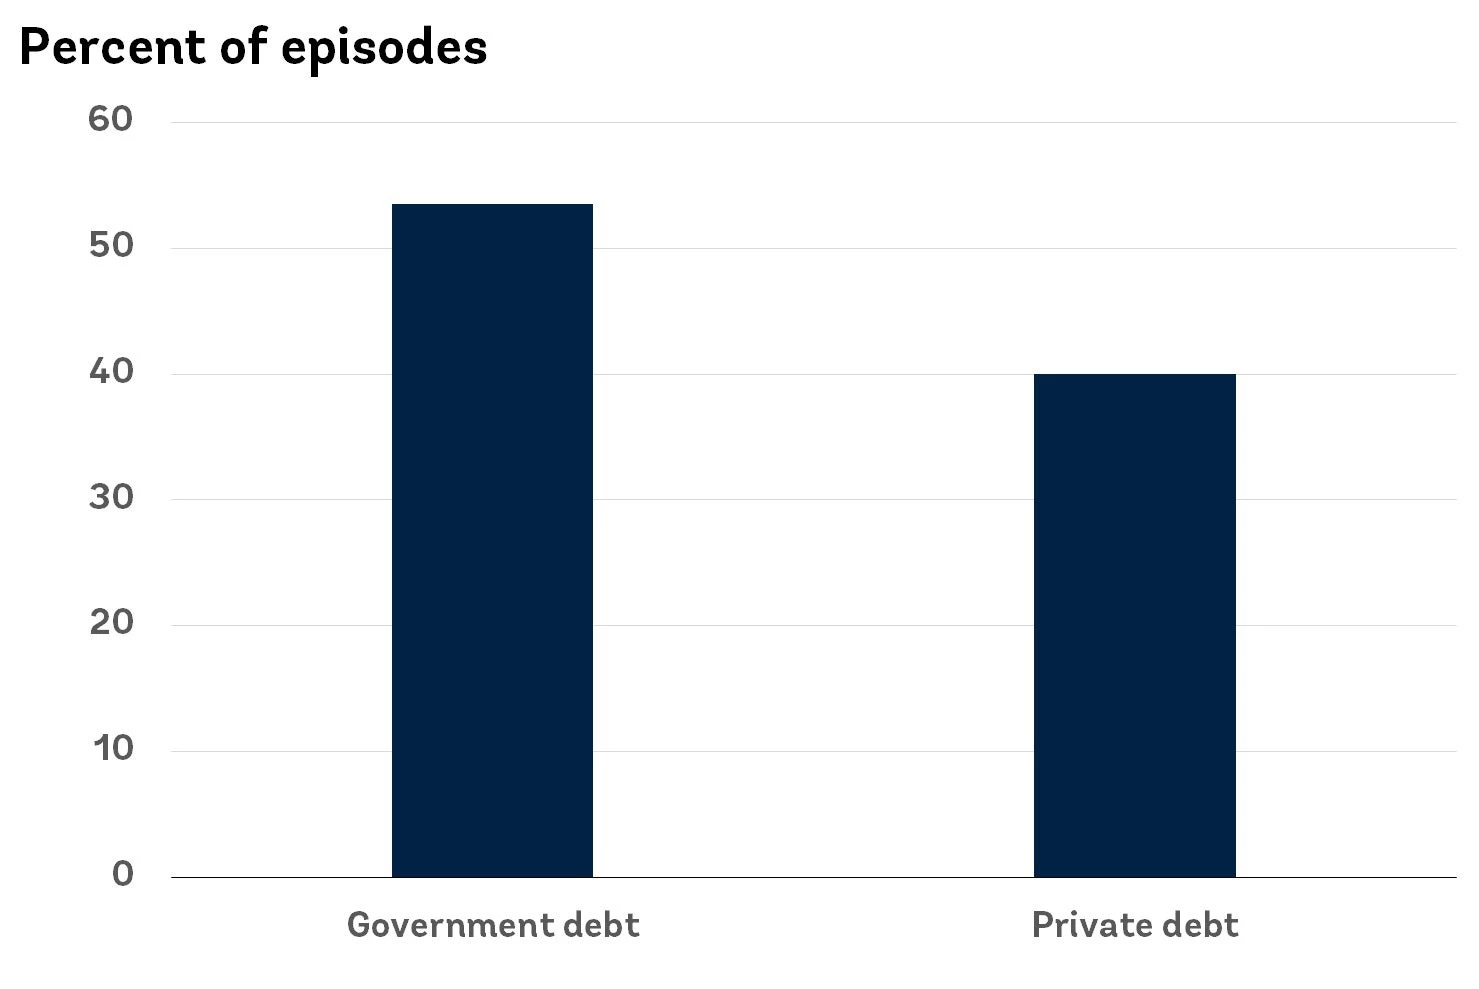 Share of national debt accumulation episodes associated with financial crises